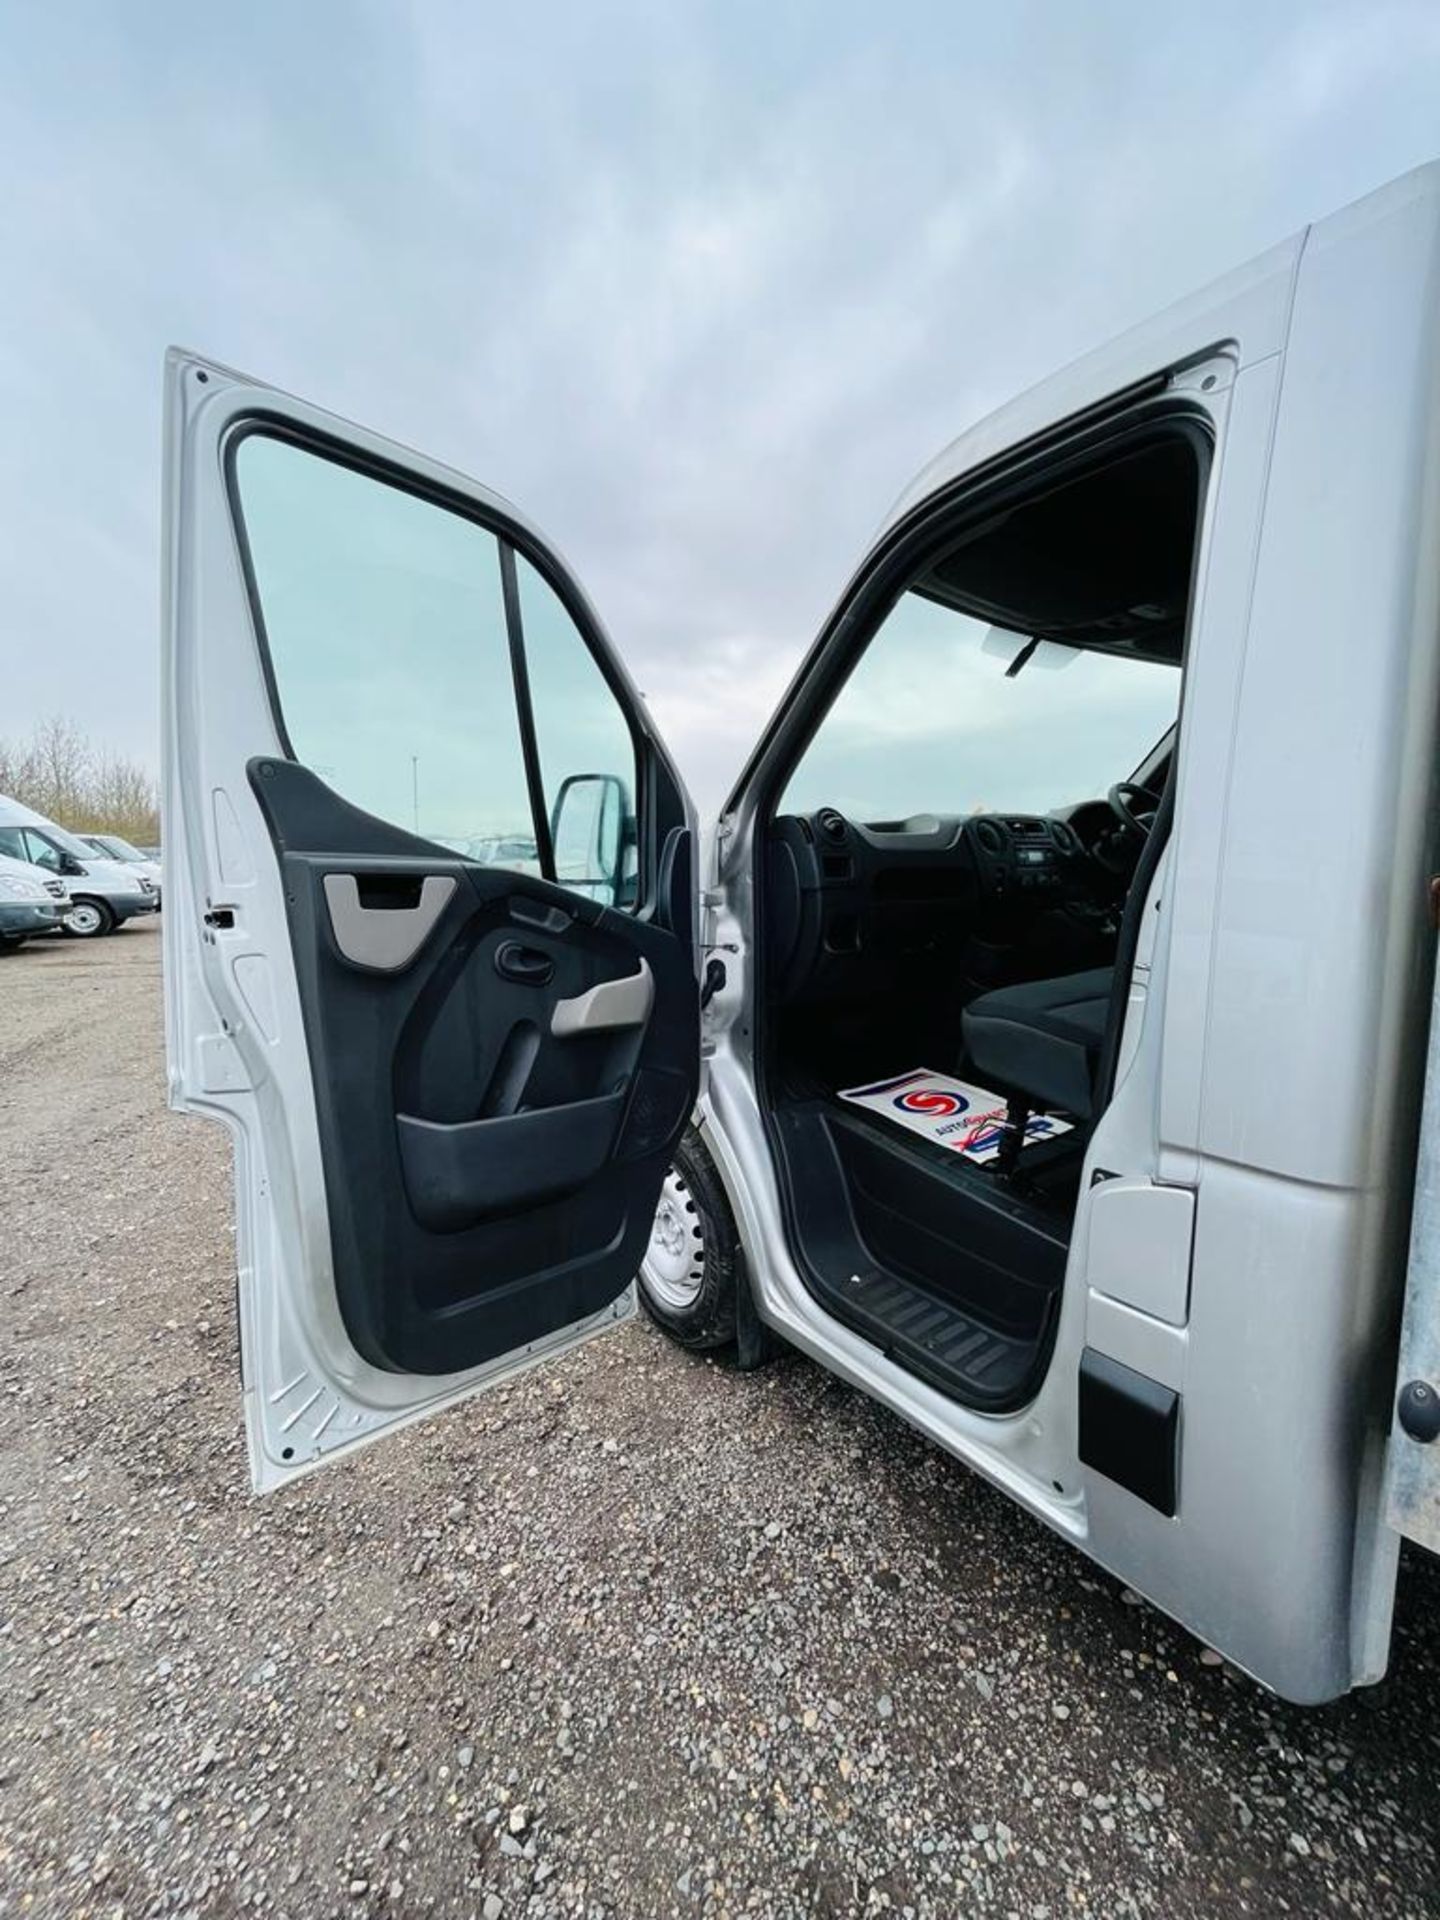 **ON SALE** Vauxhall Movano 2.3 CDTI BlueInjection F3500 L2 Dropside Alloy Body 2017 '67 Reg' - Image 16 of 19